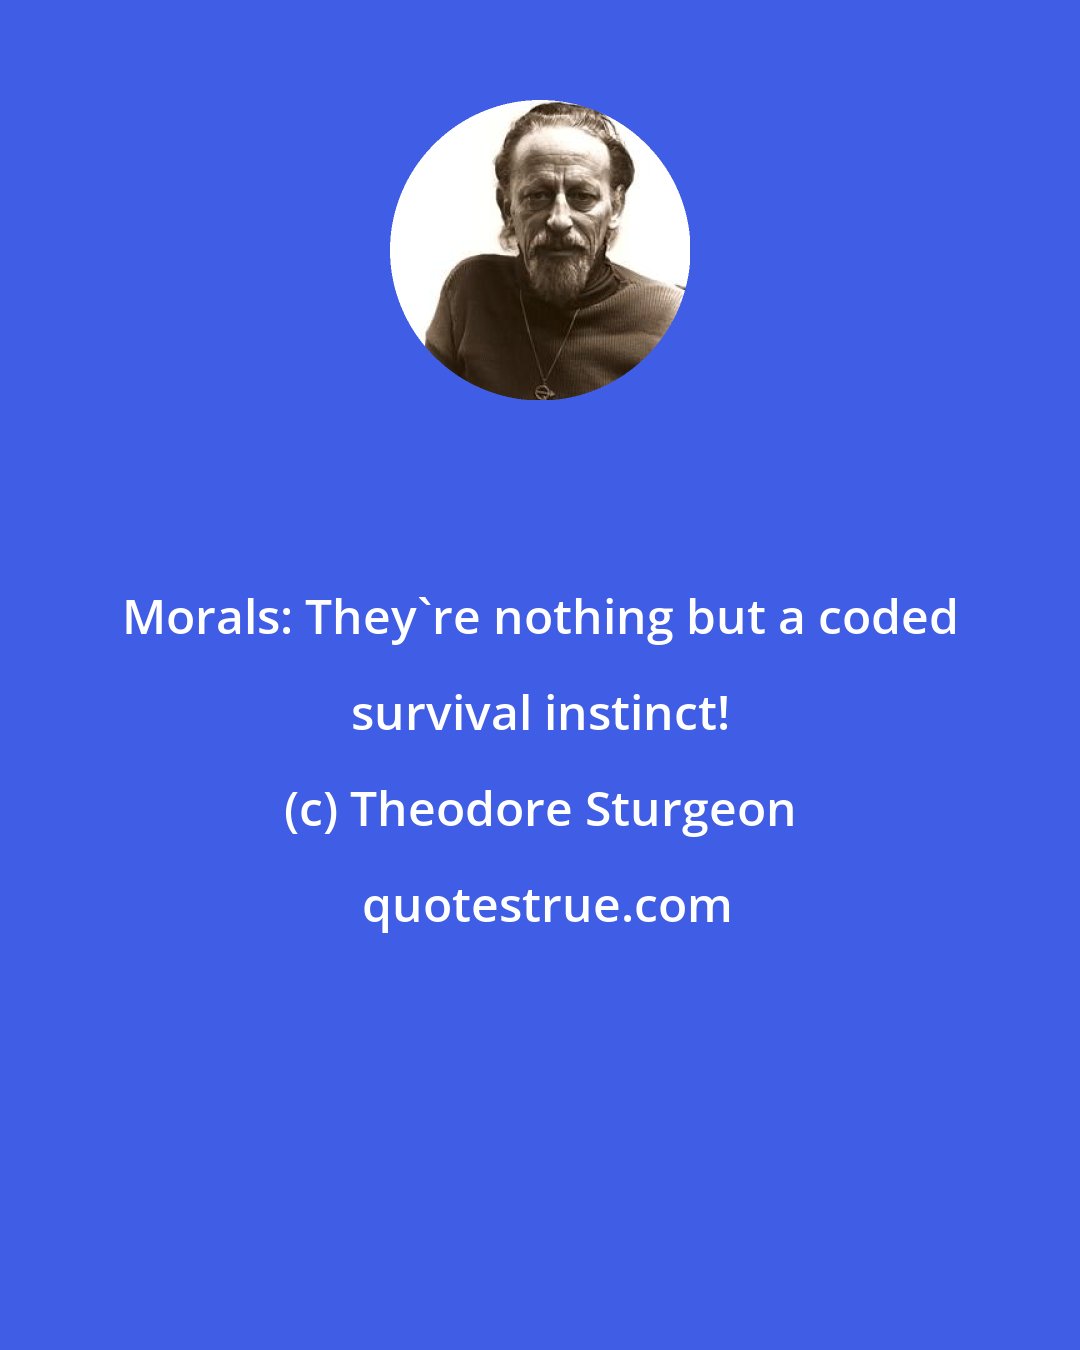 Theodore Sturgeon: Morals: They're nothing but a coded survival instinct!